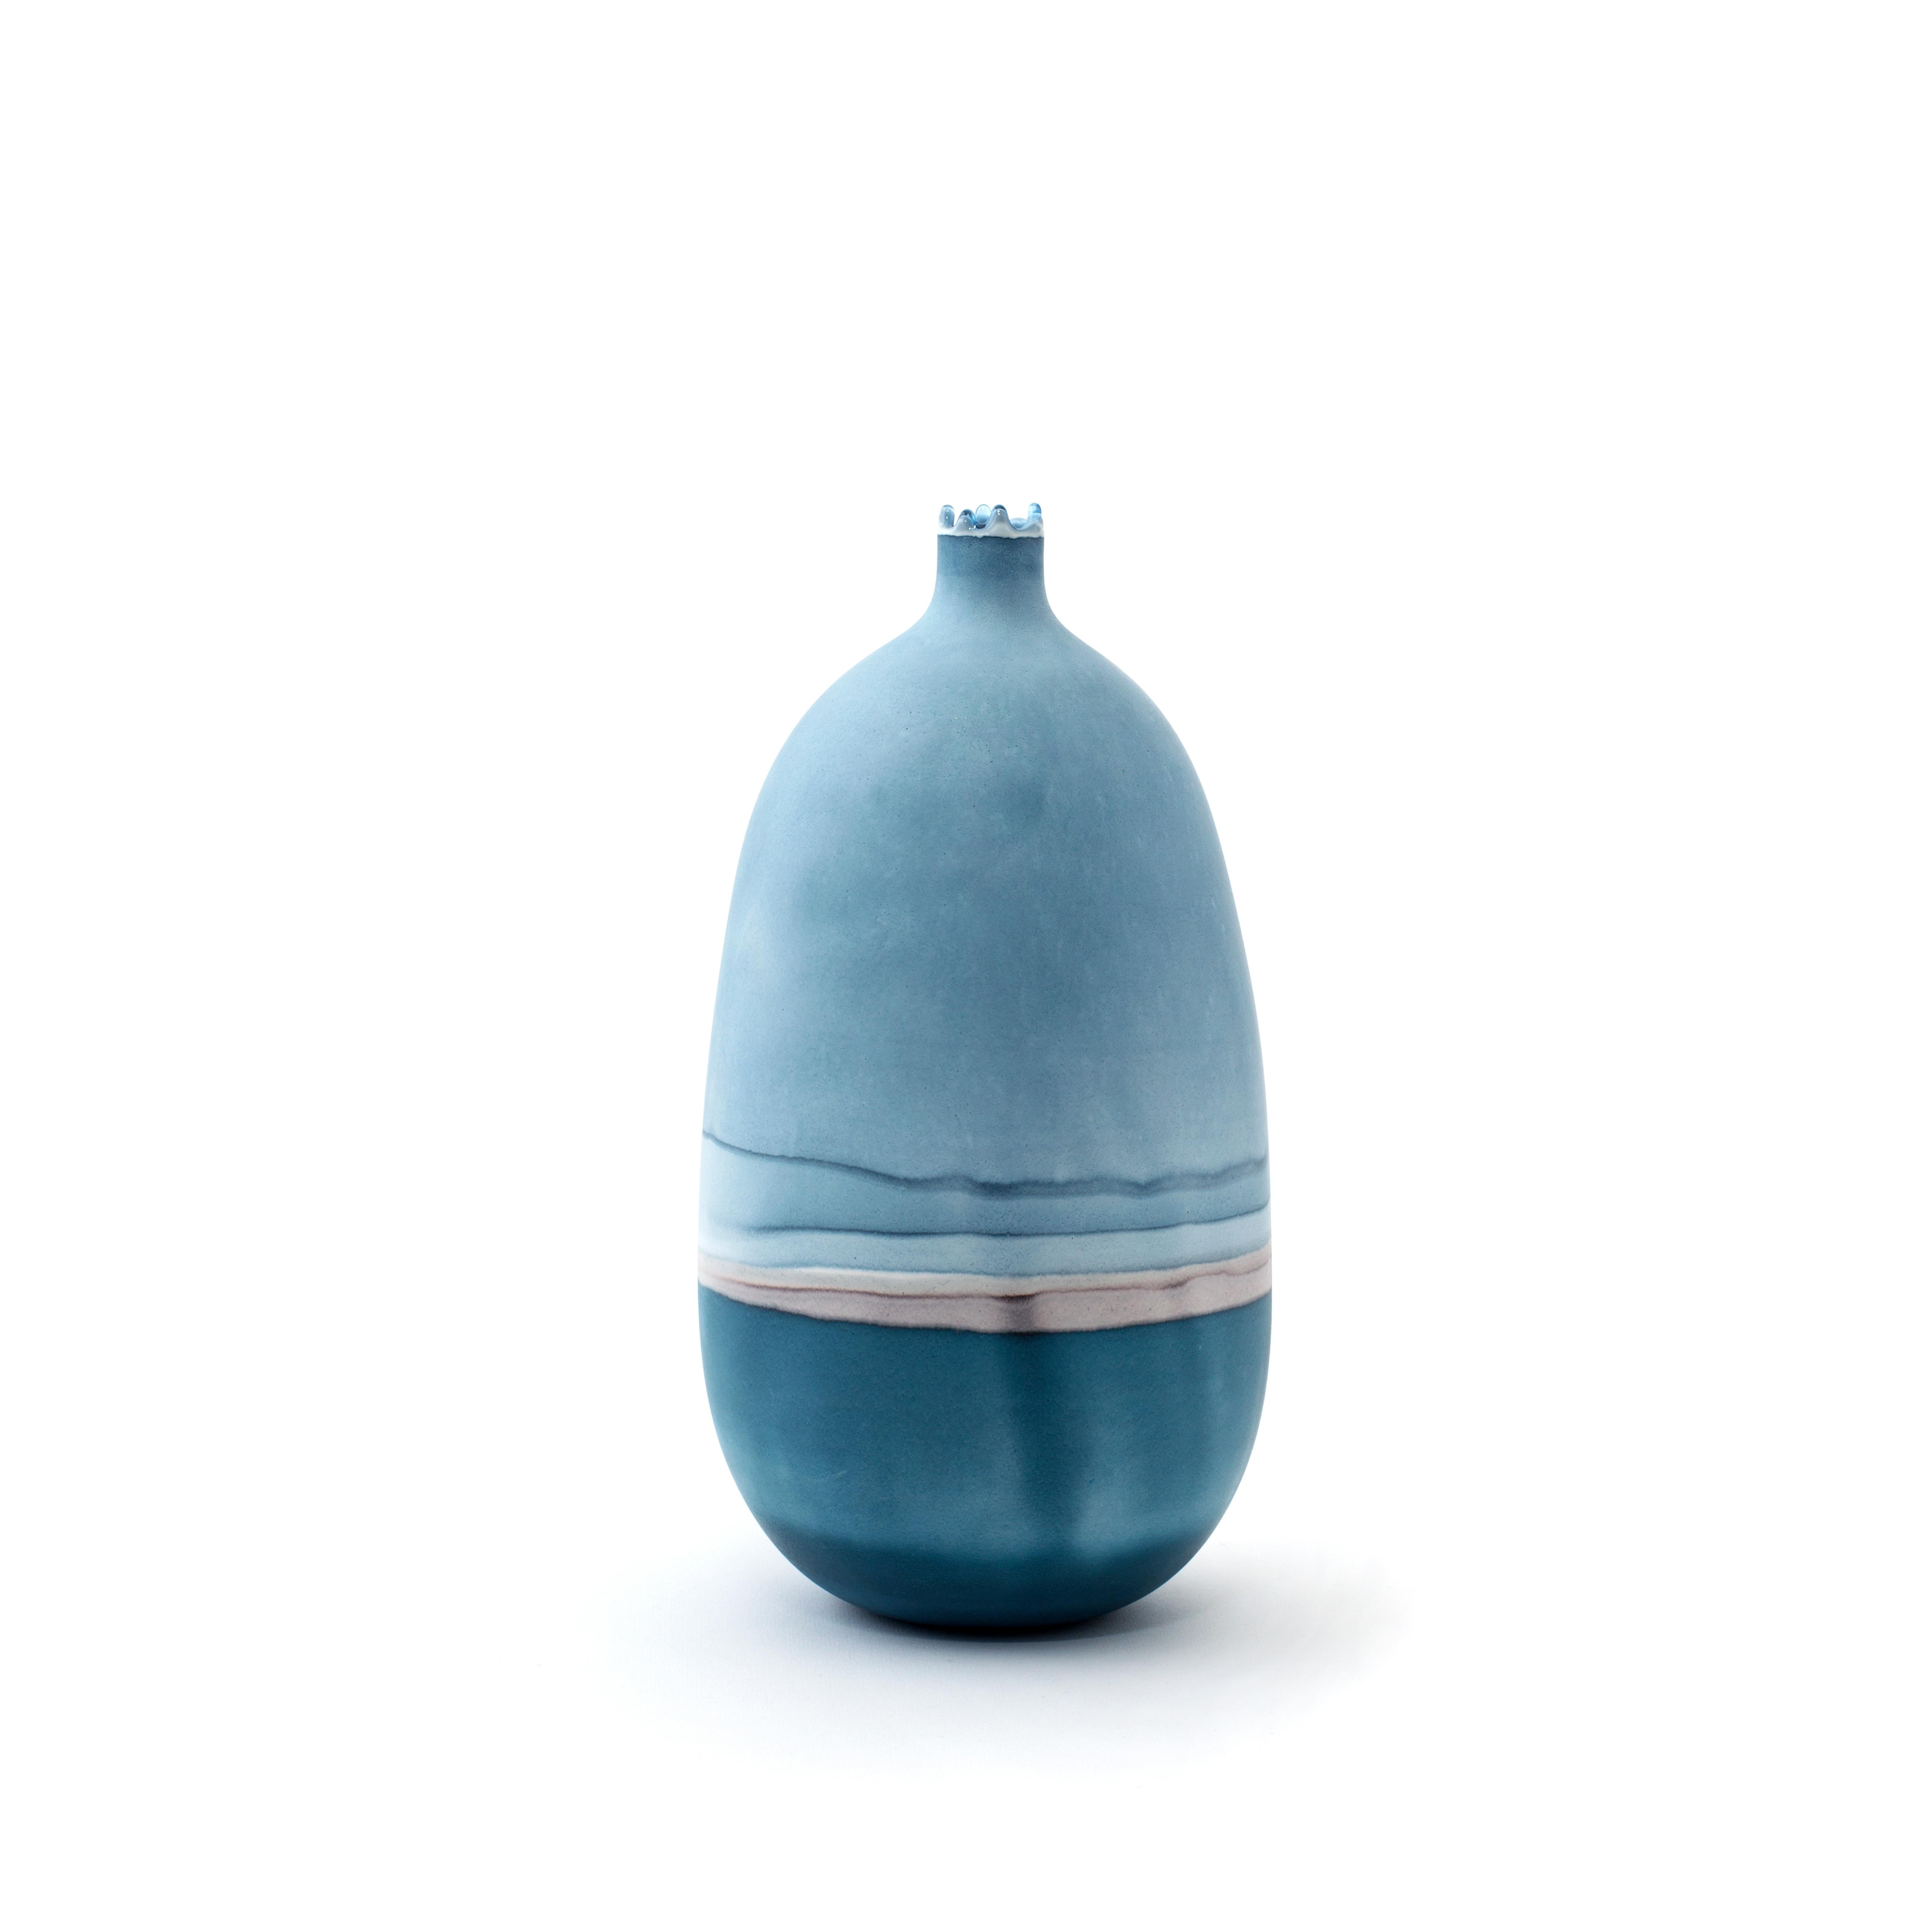 Slate Blue Mercury Vase by Elyse Graham
Dimensions: W 14 x D 14 x H 25.5cm
Materials: Plaster, Resin
MOLDED, DYED, AND FINISHED BY HAND IN LA. CUSTOMIZATION
AVAILABLE.
ALL PIECES ARE MADE TO ORDER

This collection of vessels is inspired by